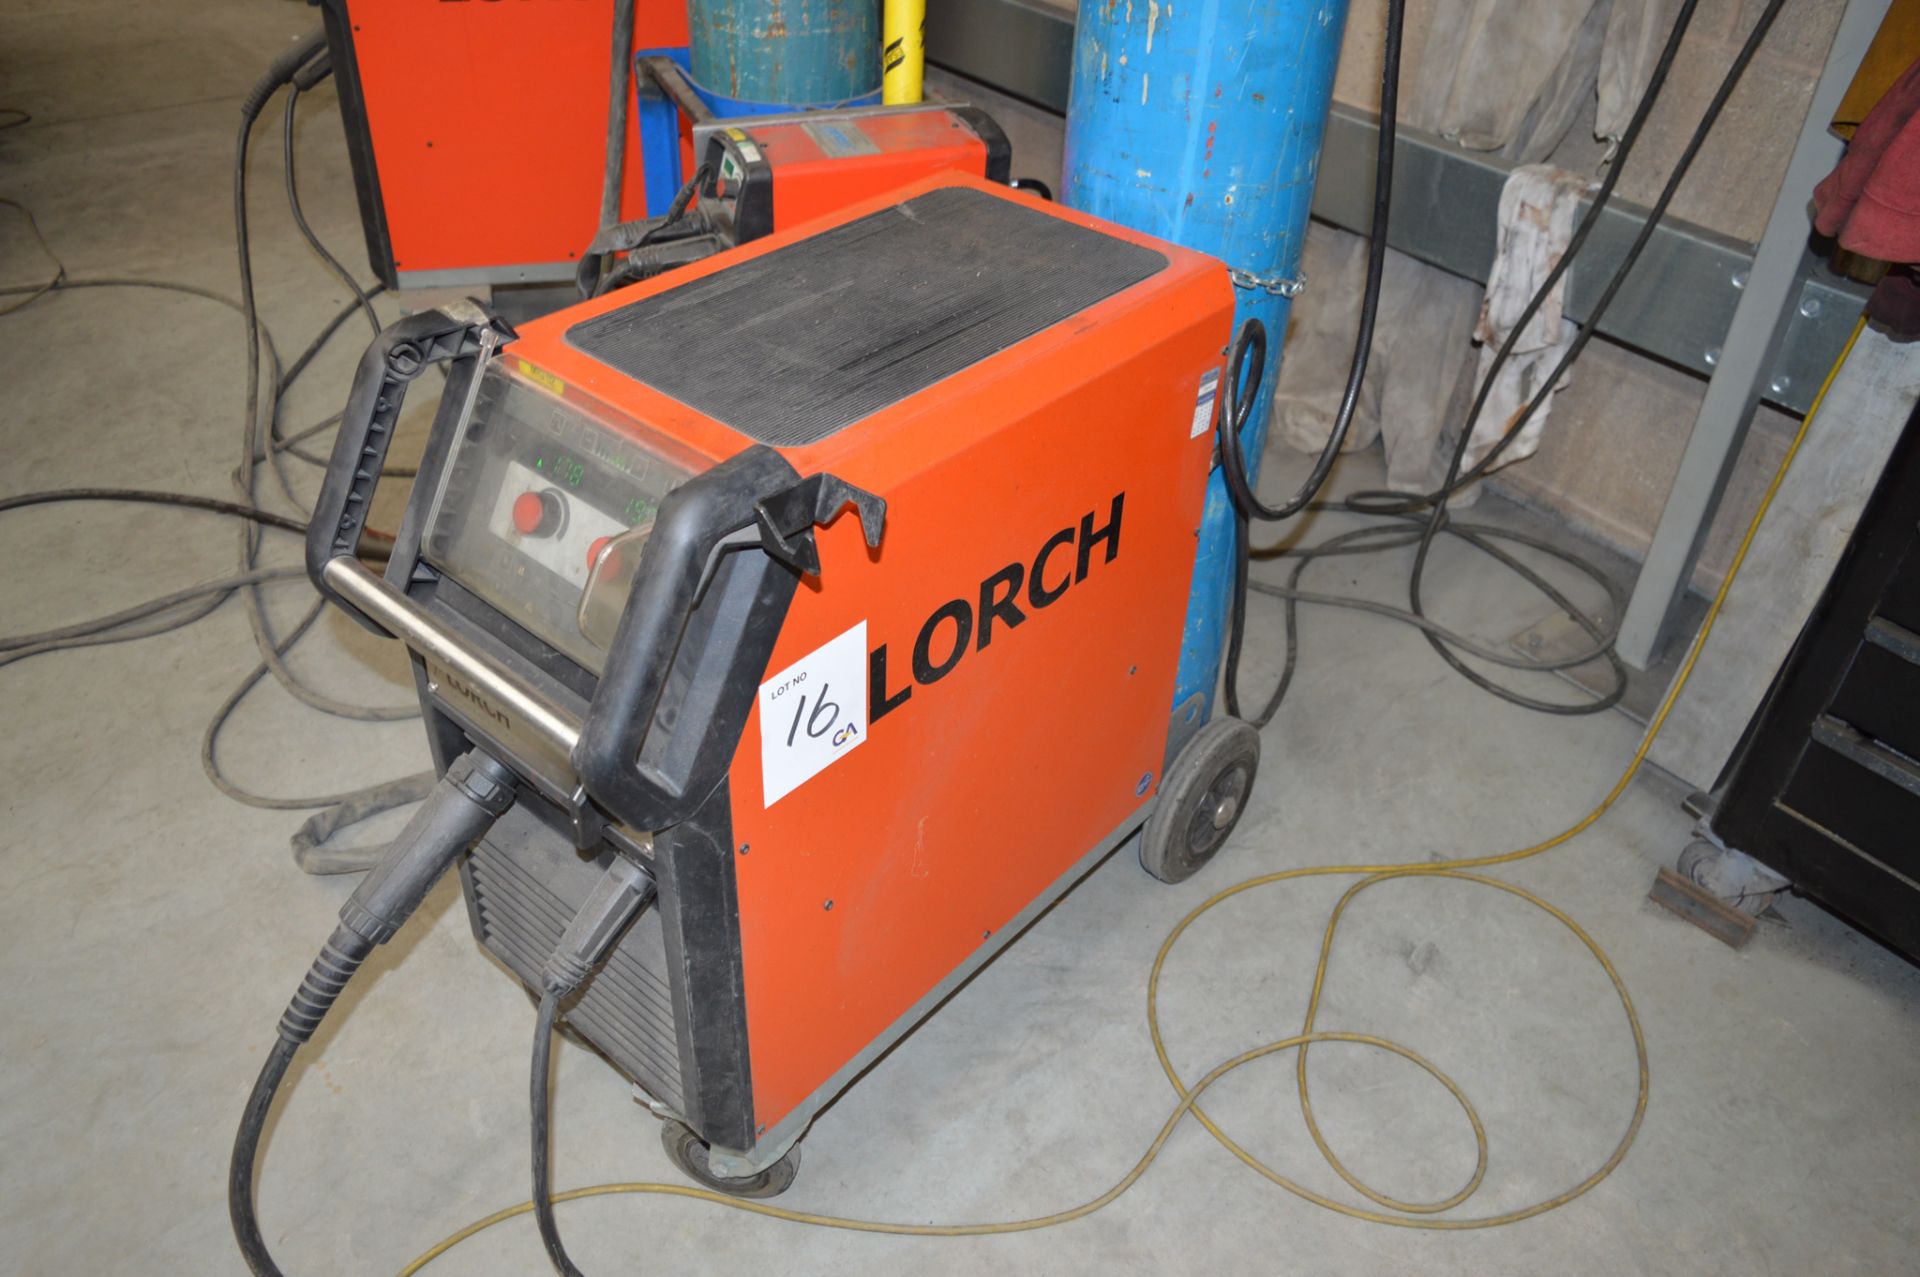 Lorch Micromig 300 MIG welder S/N: 4064-2511-0001-4 c/w torch, regulator and earth lead ** Not